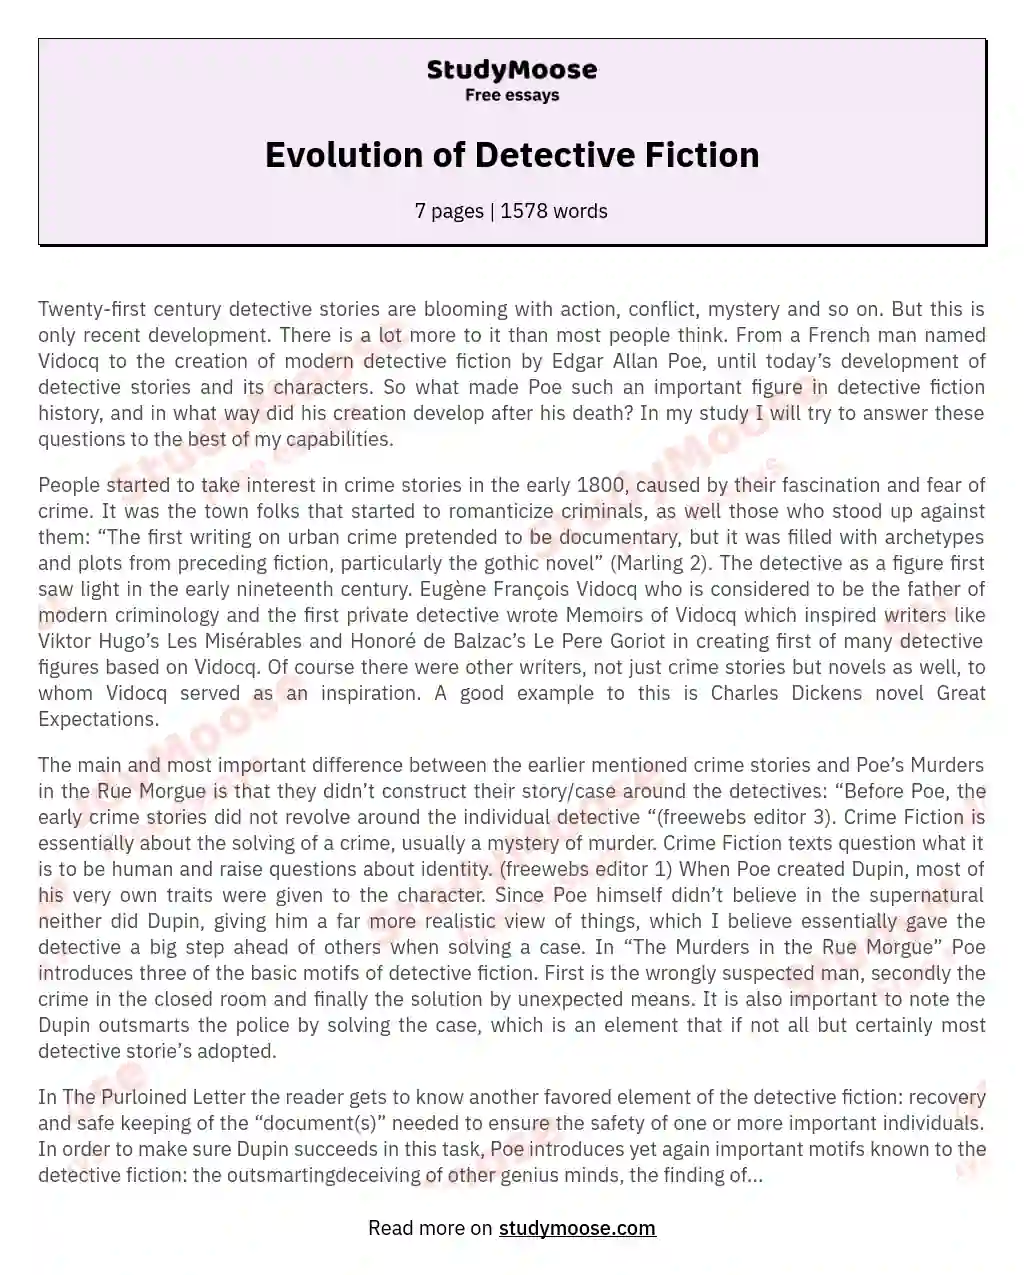 evolution-of-detective-fiction-free-essay-example